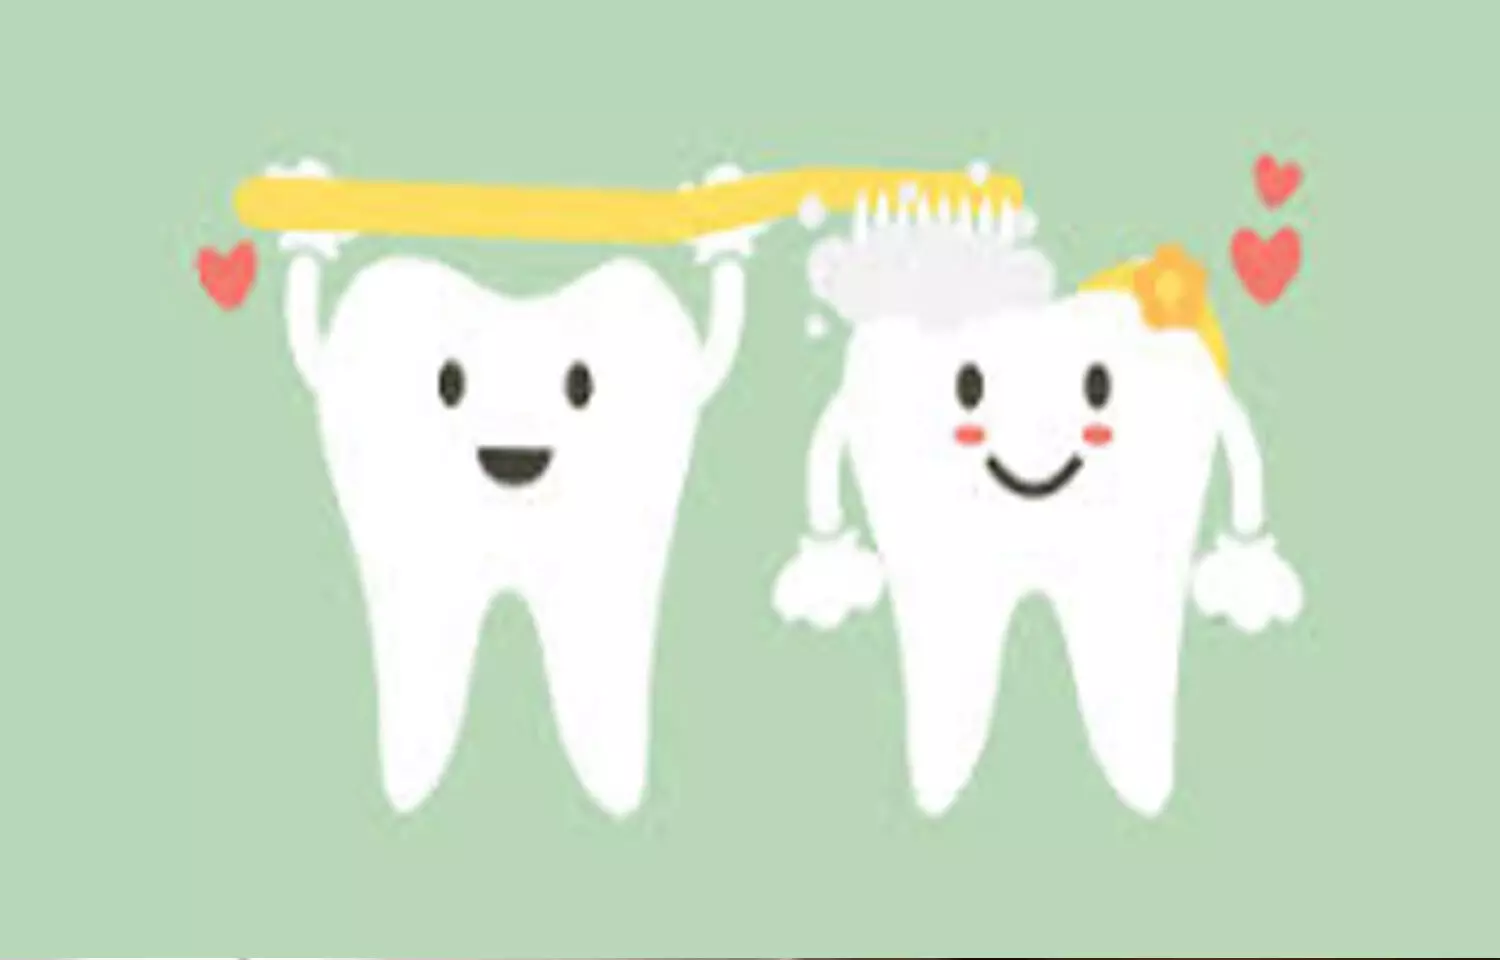 Baking soda, fluoride toothpaste effectively reduce plaque and gingivitis, Finds study